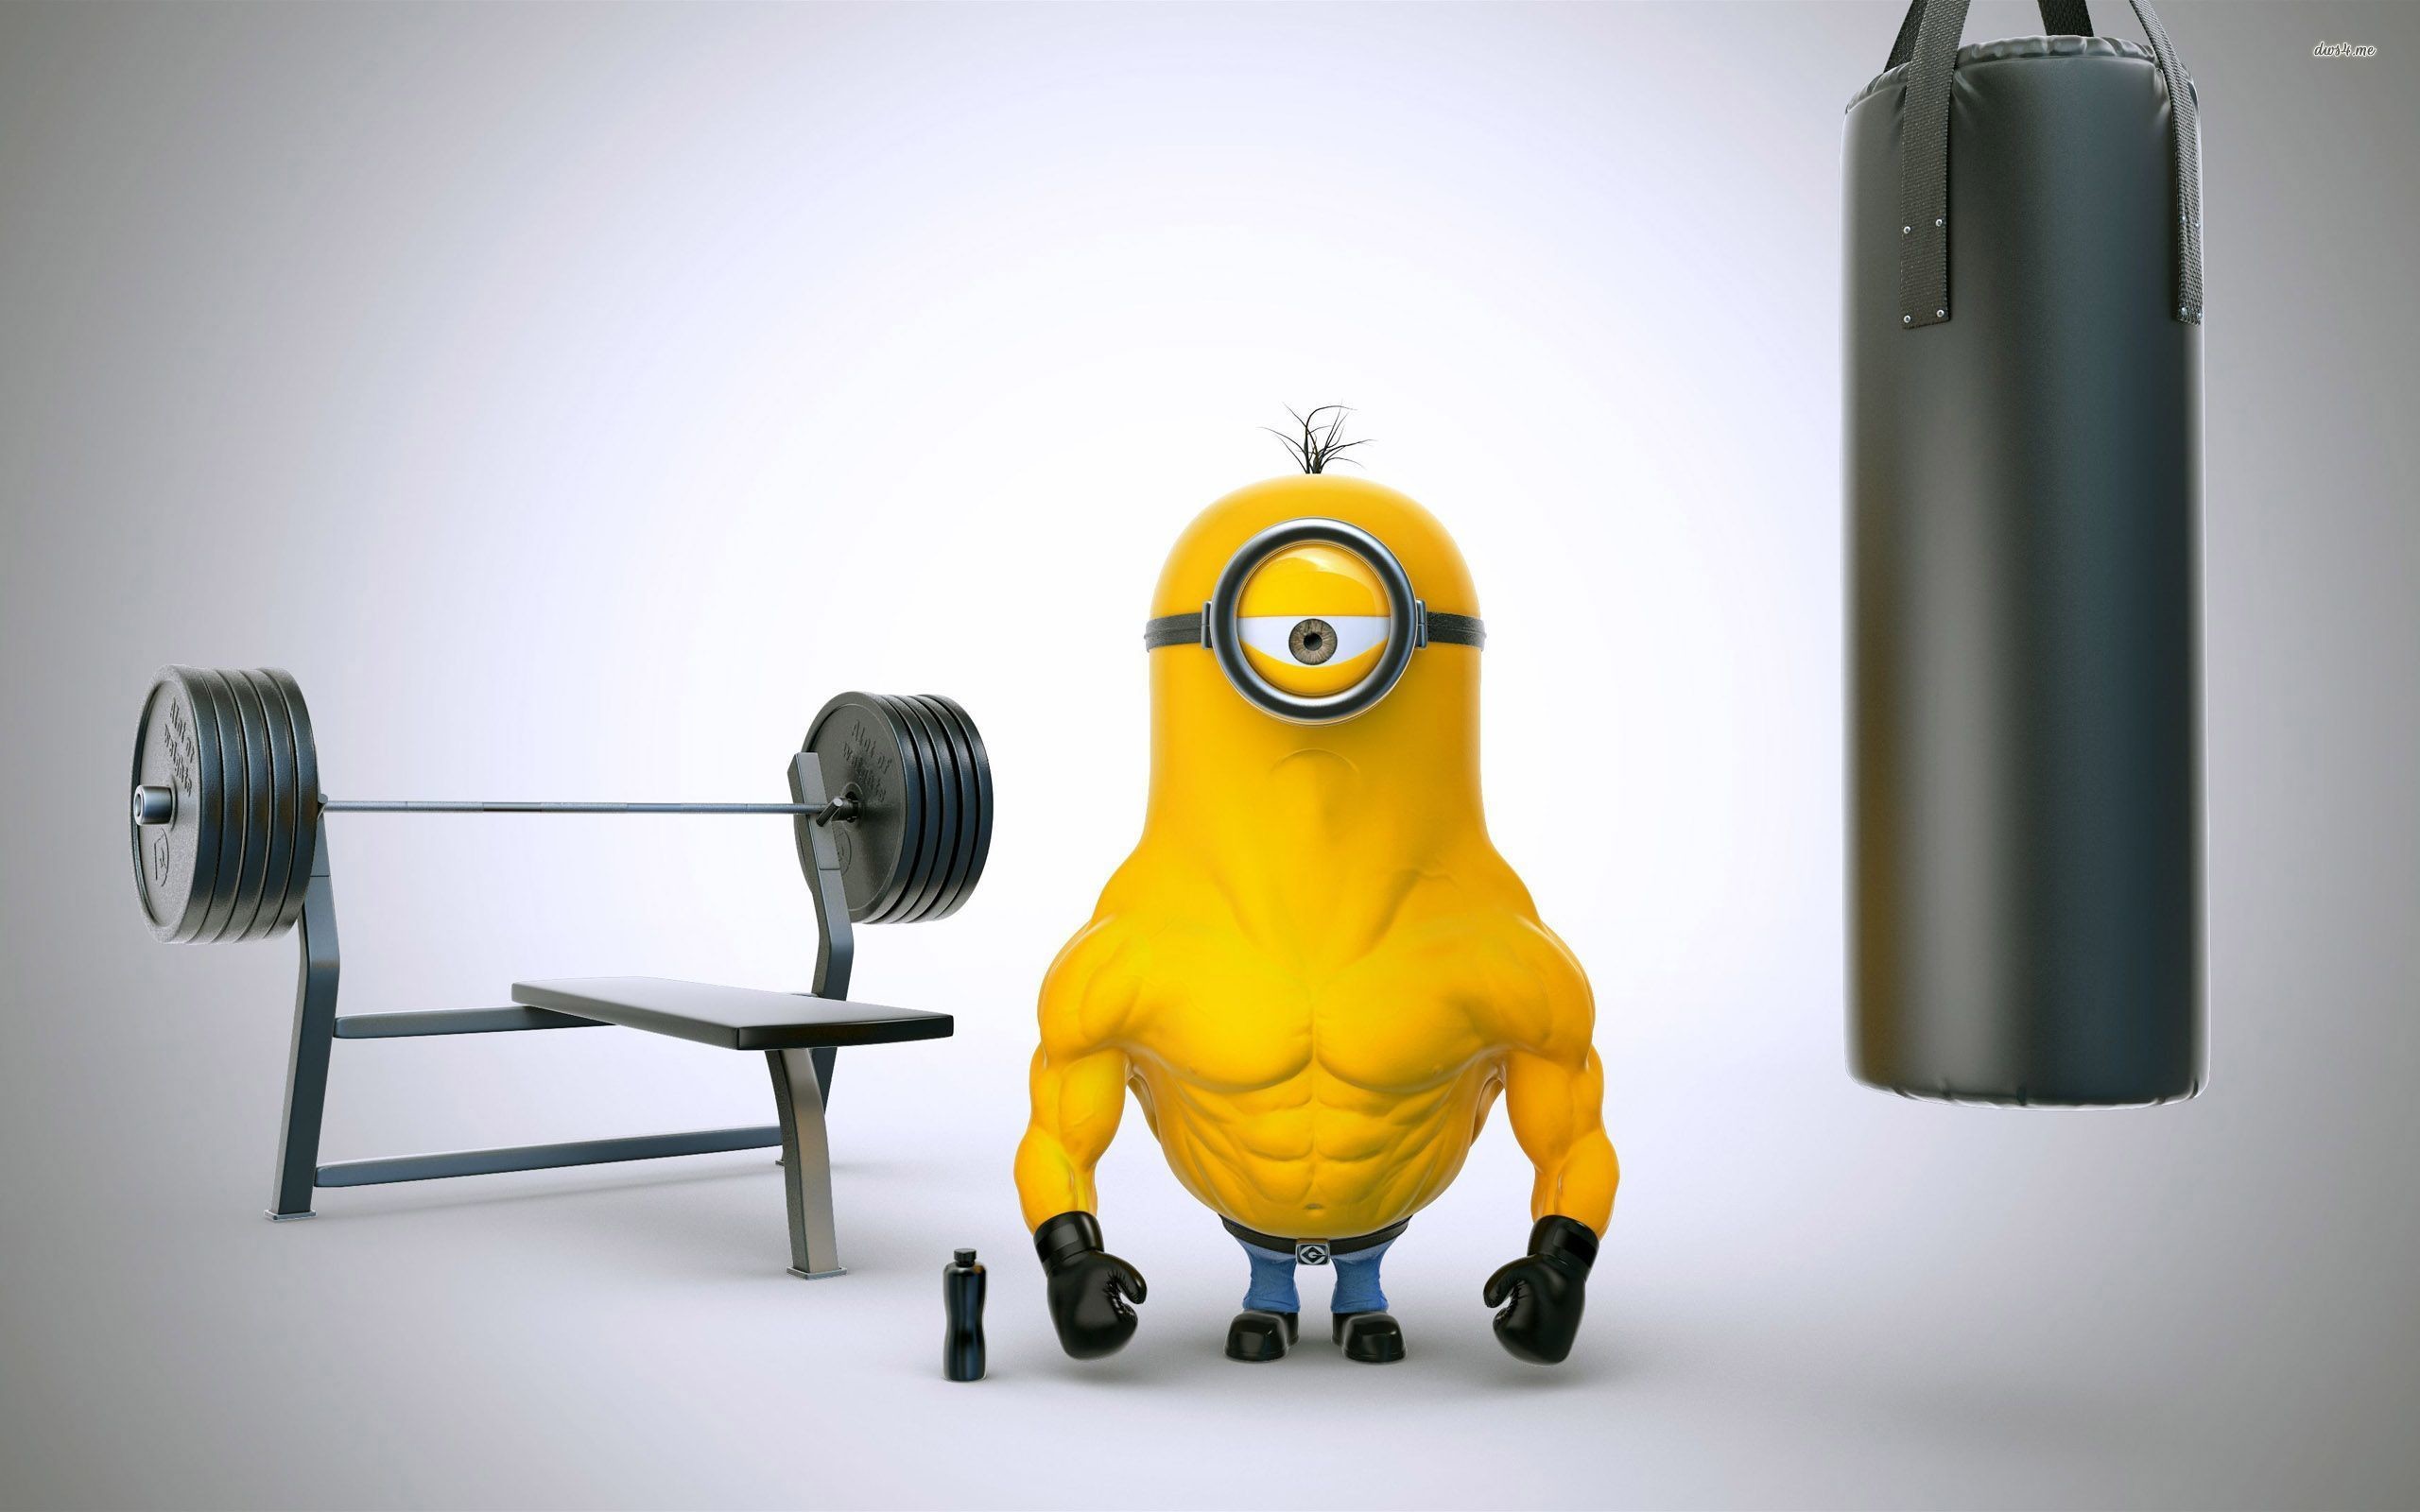 2560x1600 Bodybuilder minion with boxing gloves